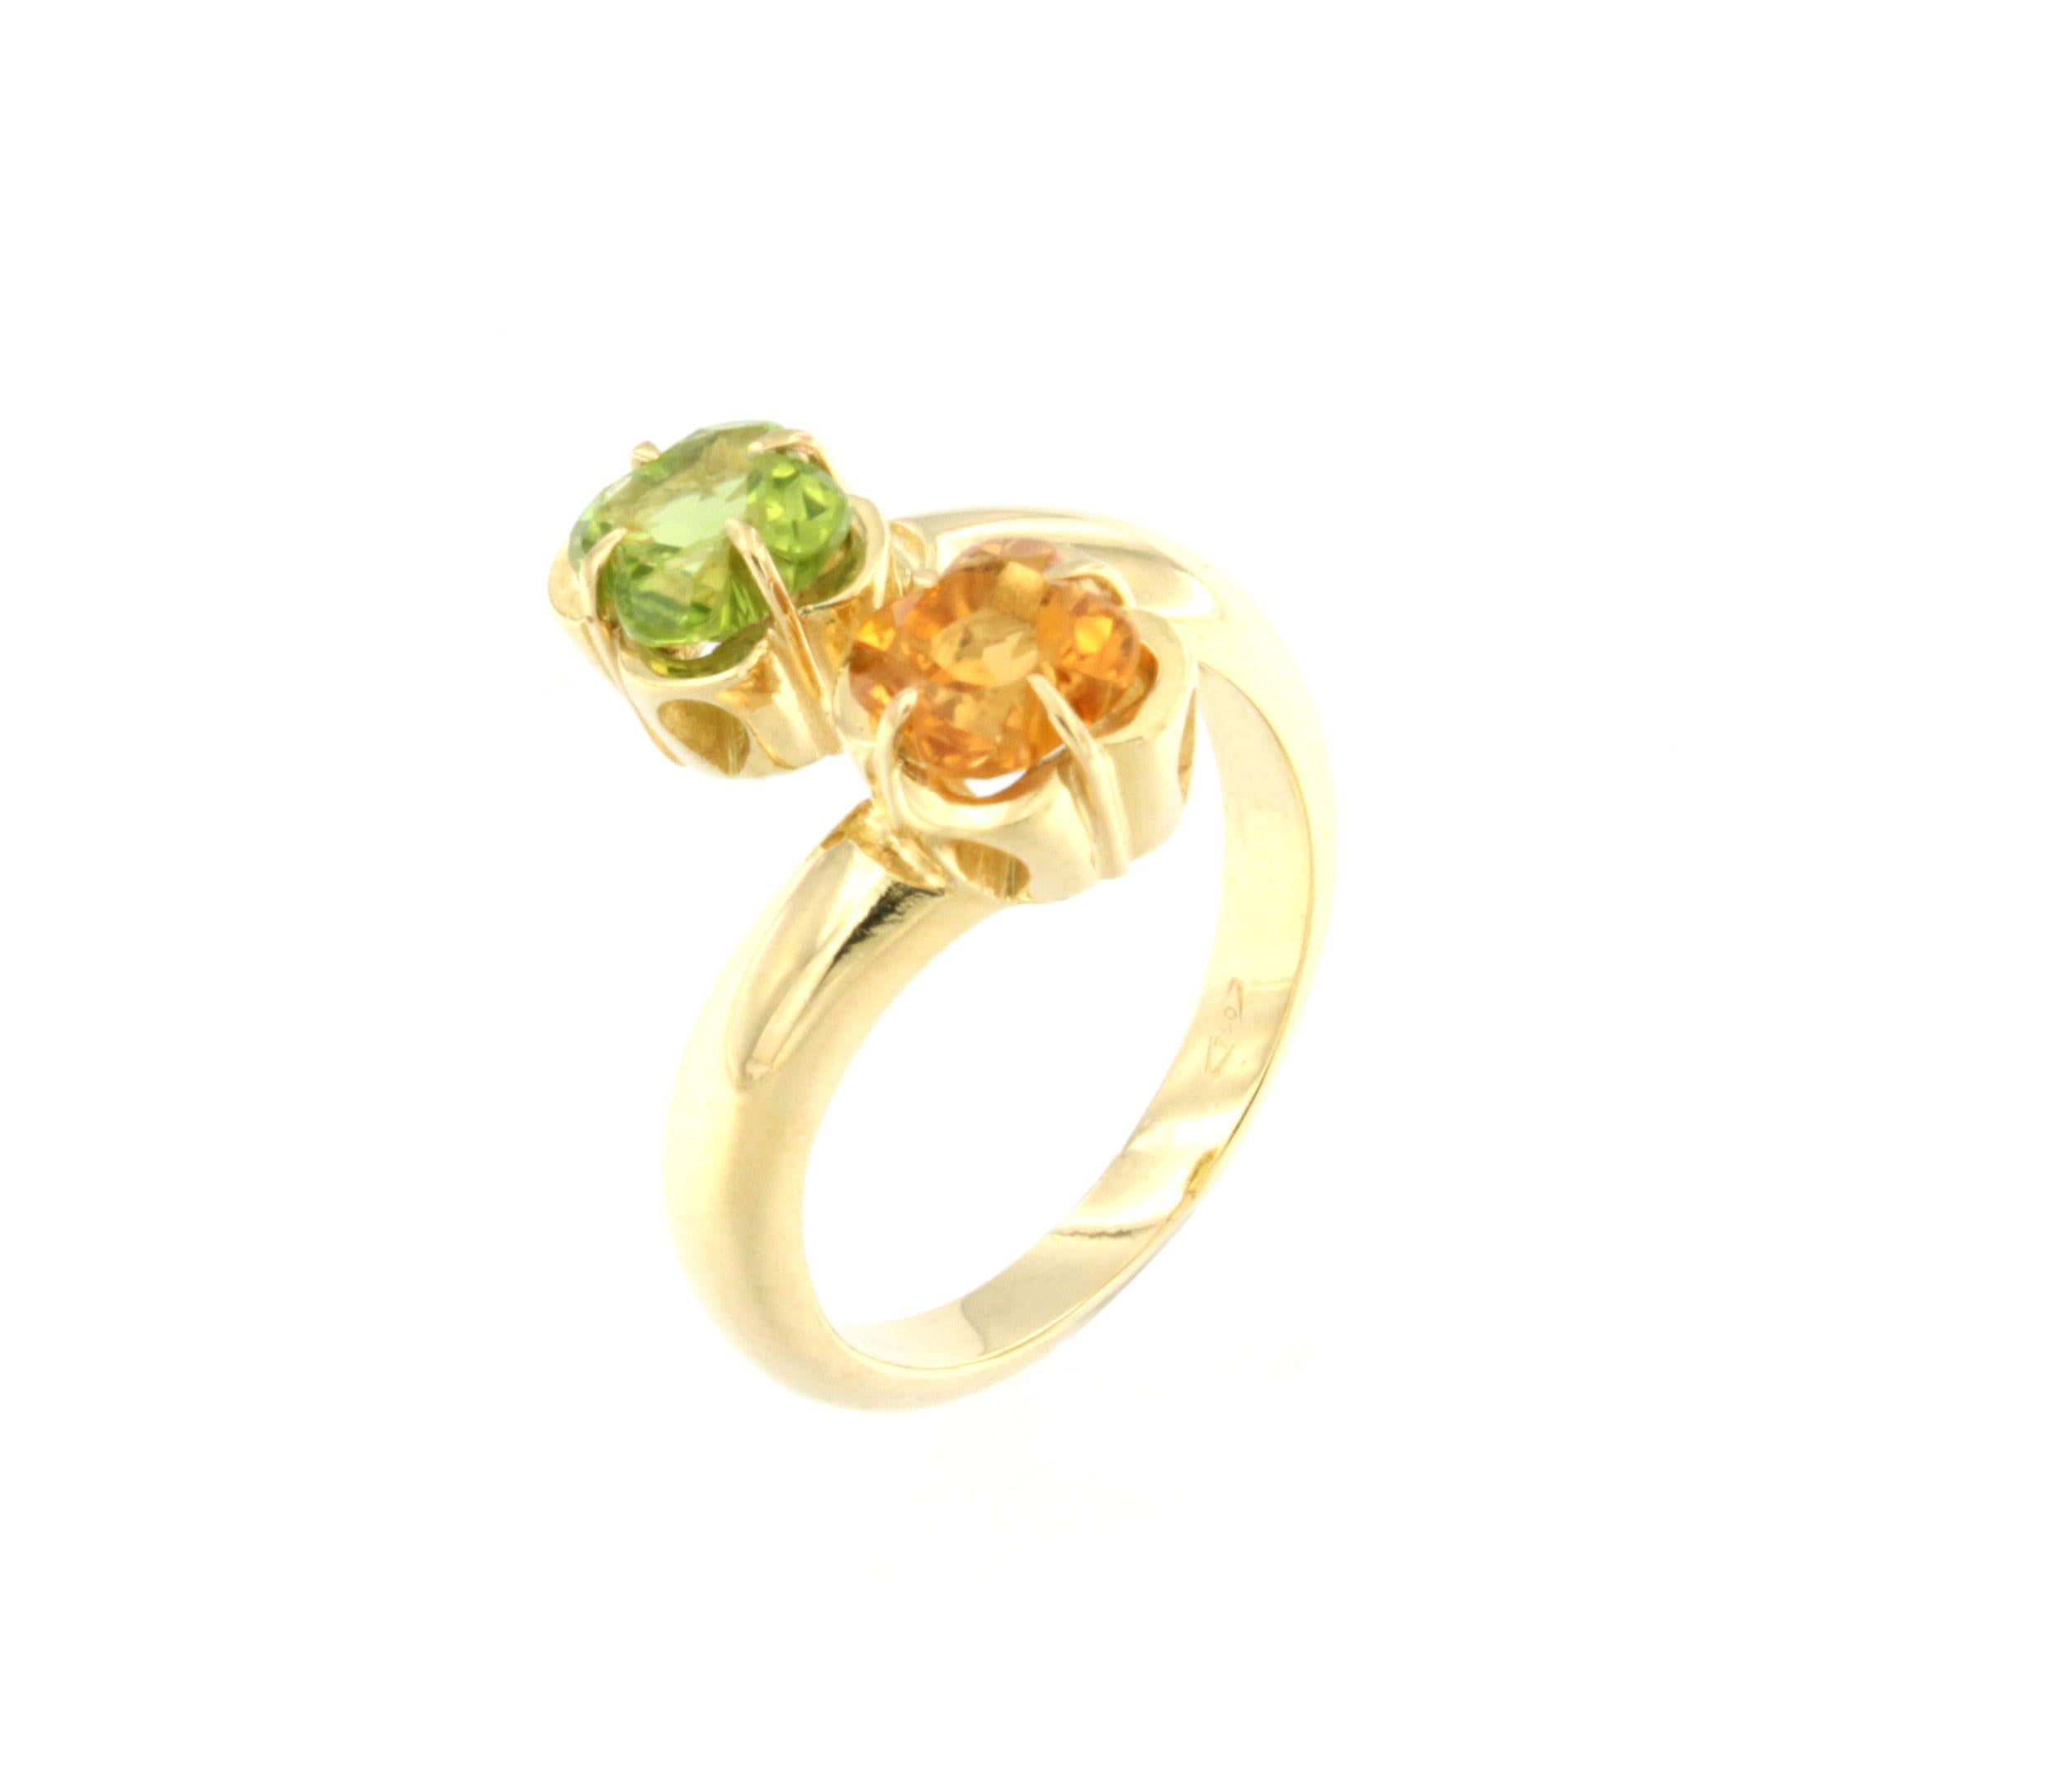 Inspired by nature, flowers are synonymous with happiness. Two delicate flowers that intertwine and caress your hand.  Made in Italy  by Stanoppi Jewellery since 1948.
Stones:  Citrine and Peridot 
Size :  14 - 54 - 7    yellow gold g.7.00

All